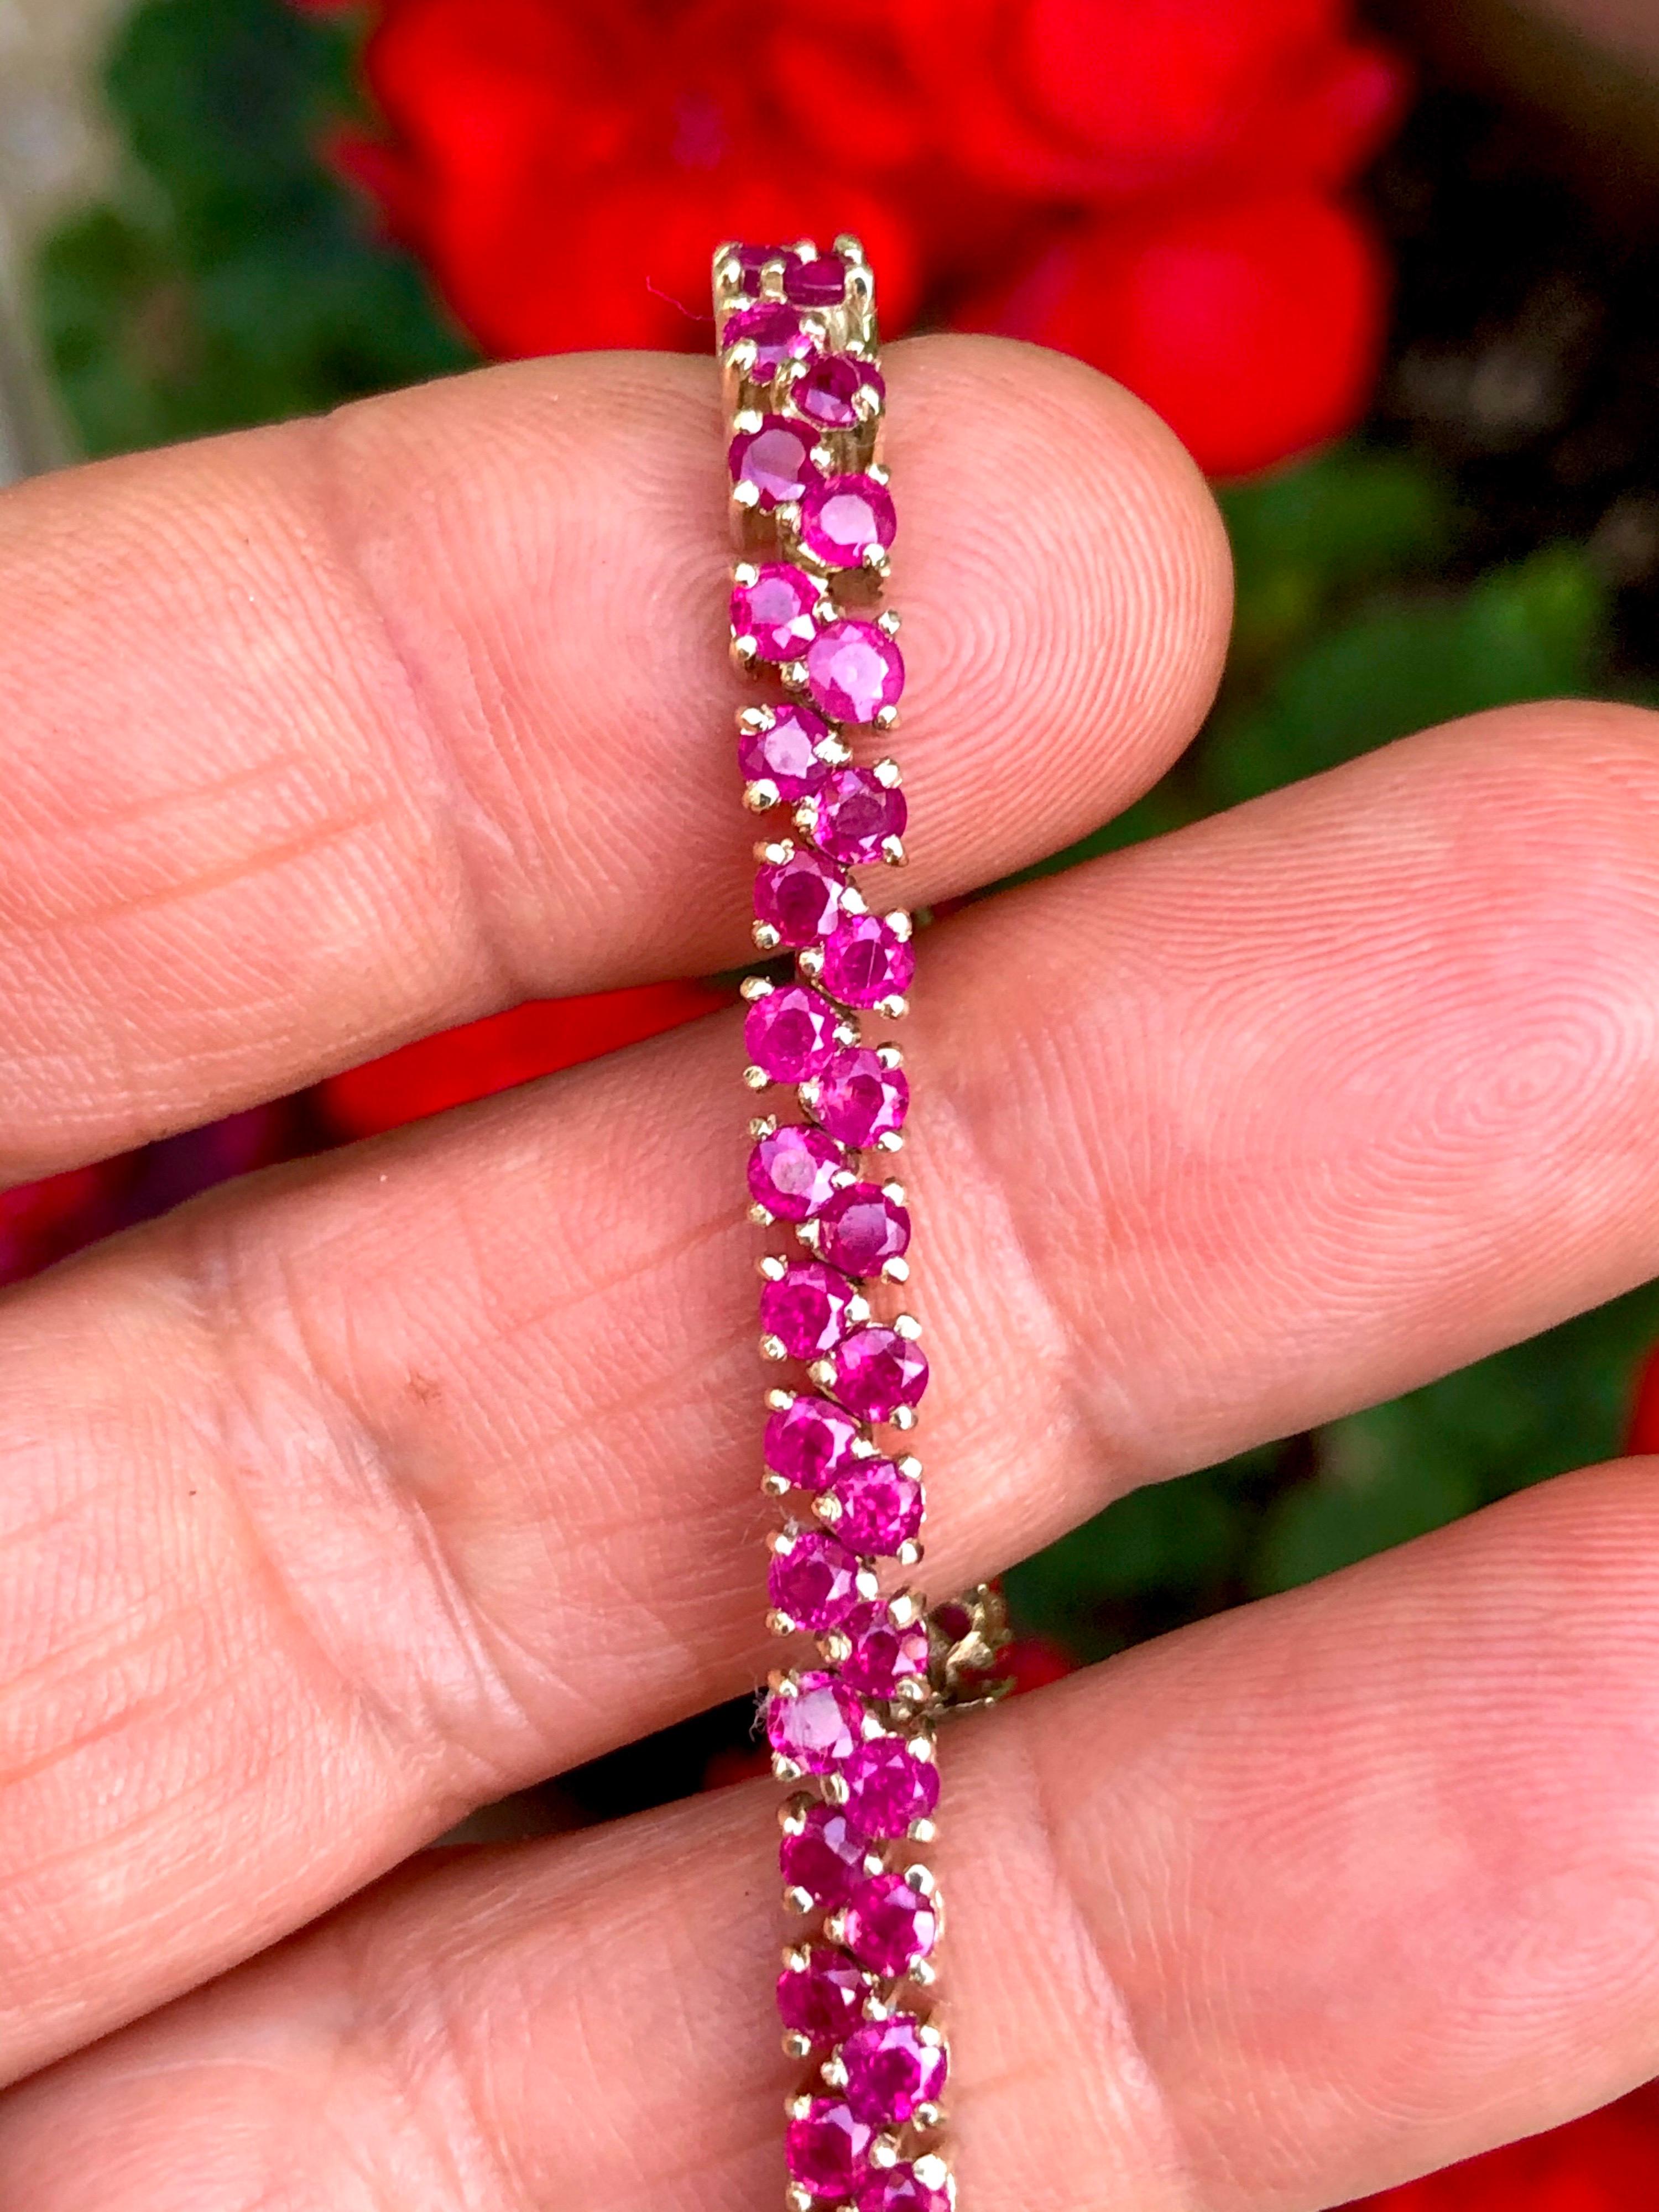 A vibrant and Flexible band designed as a two-row of rubies,  14k yellow gold. The bracelet holds 94 round cut rubies. The rubies have a total weight of approximately 11.00 carats, with a pinkish-red hue throughout. The bracelet measures 7 inches in